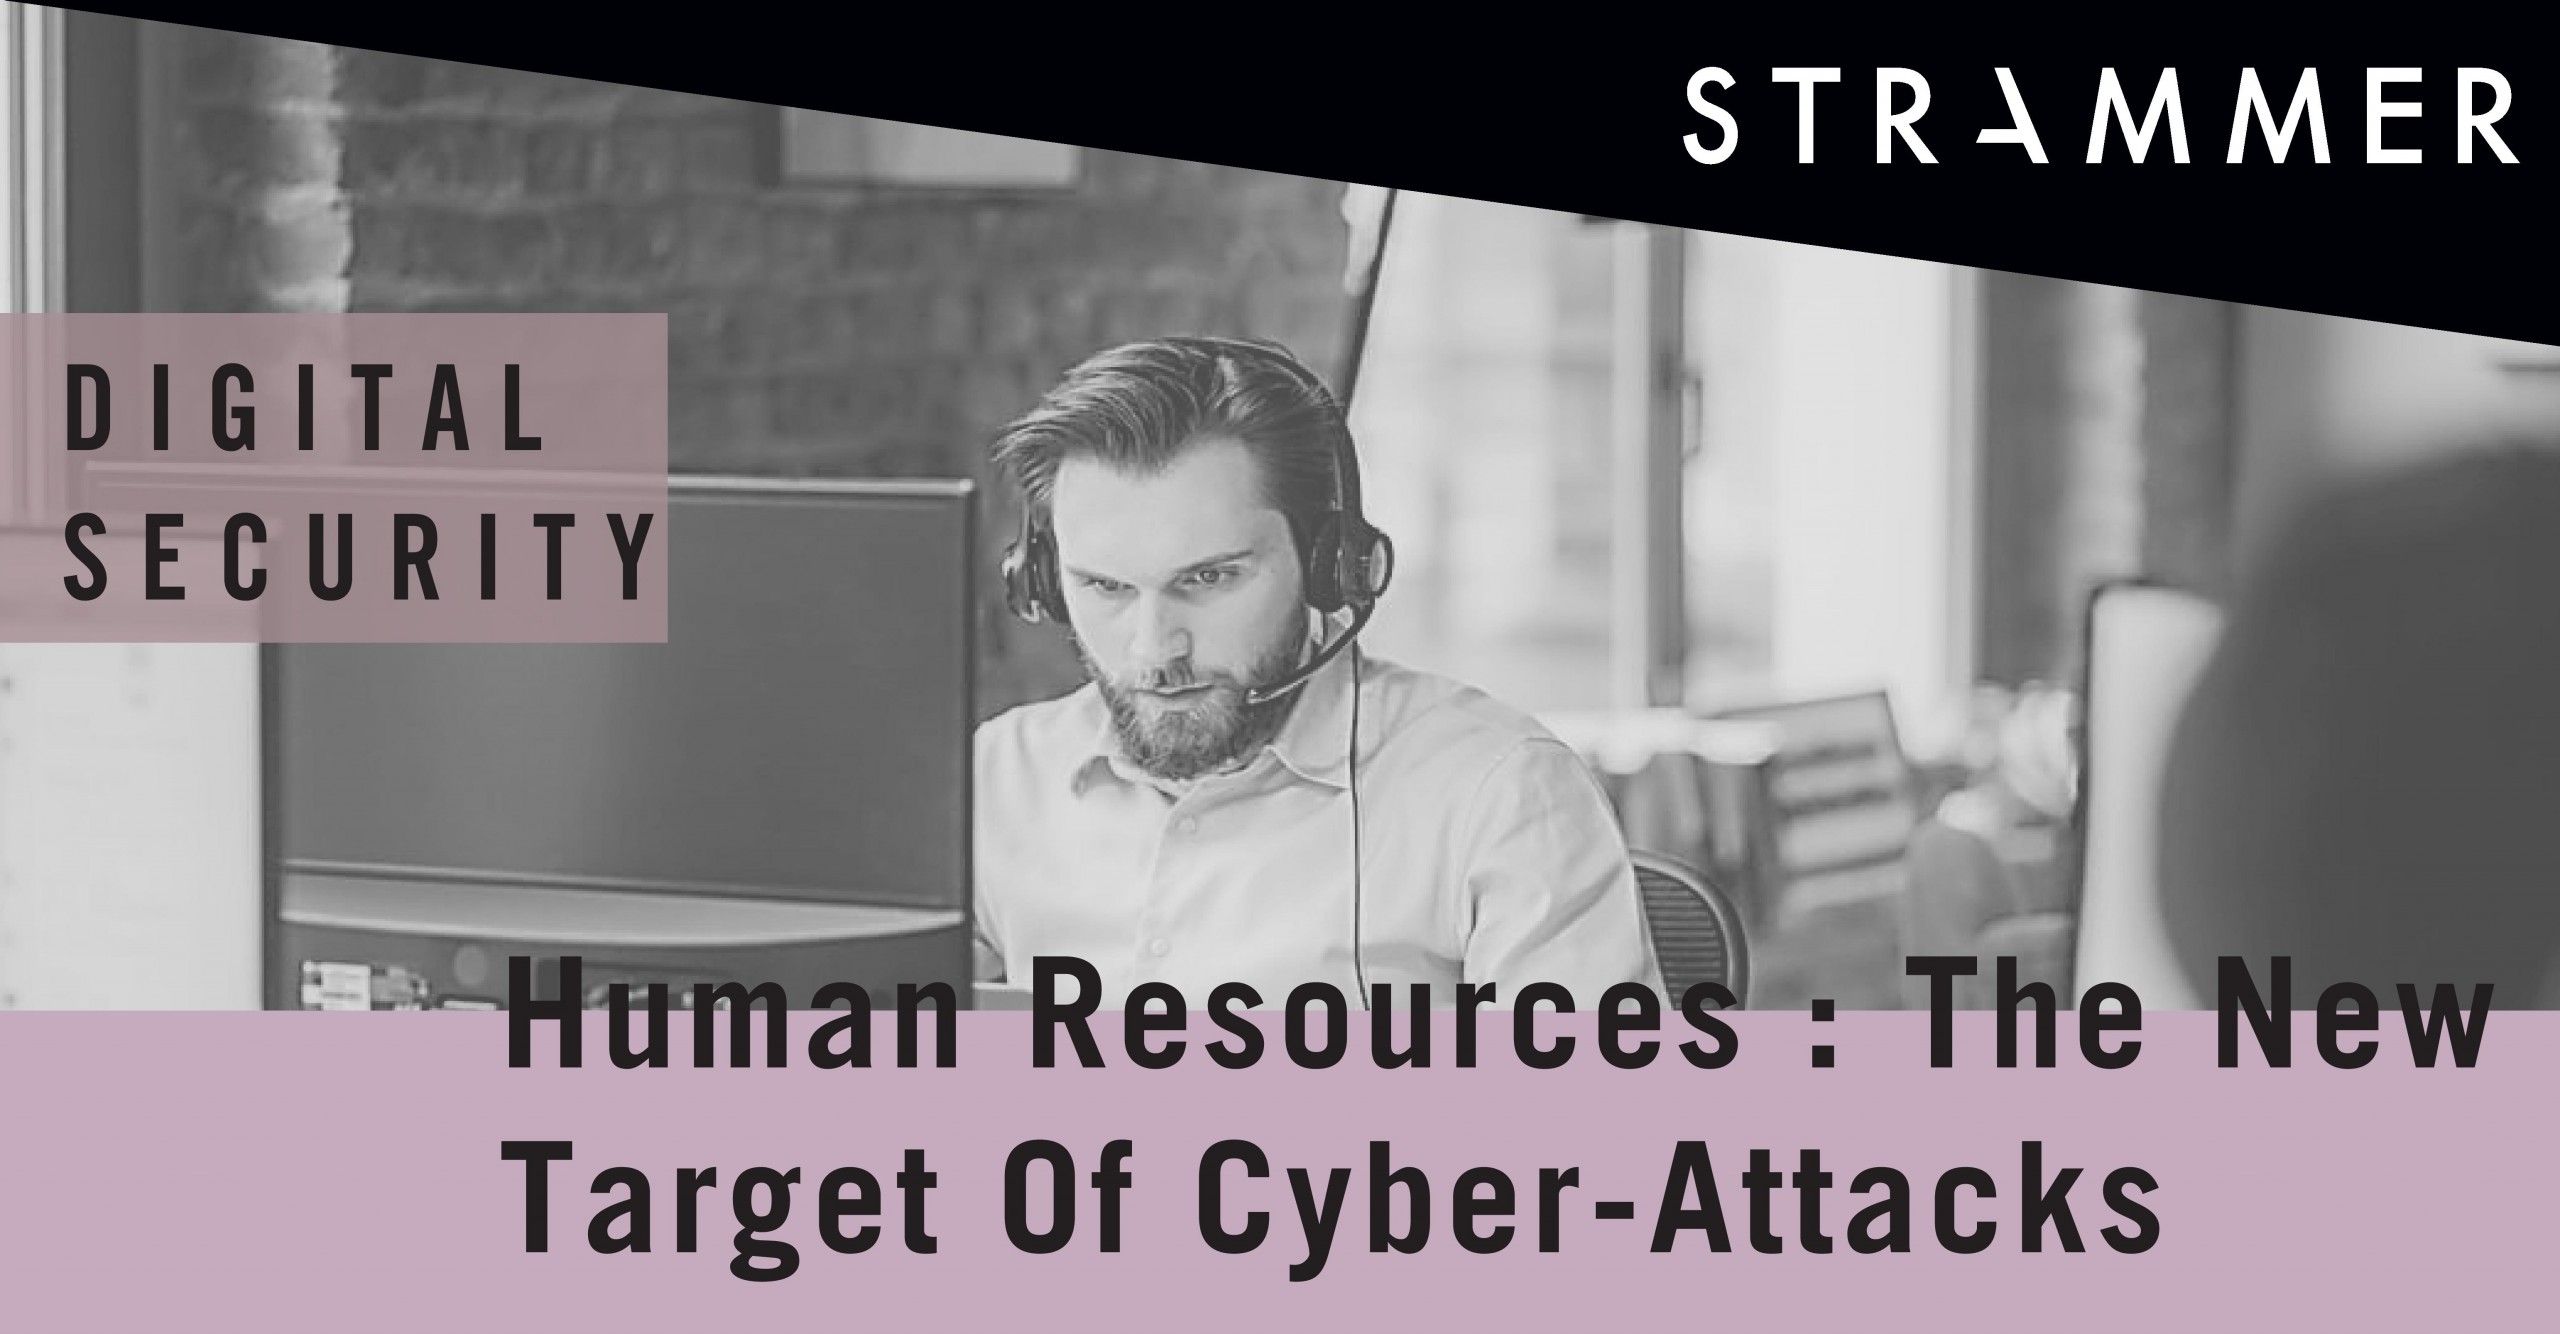 Importance Of Protecting Human Resources From Cyber-Attacks